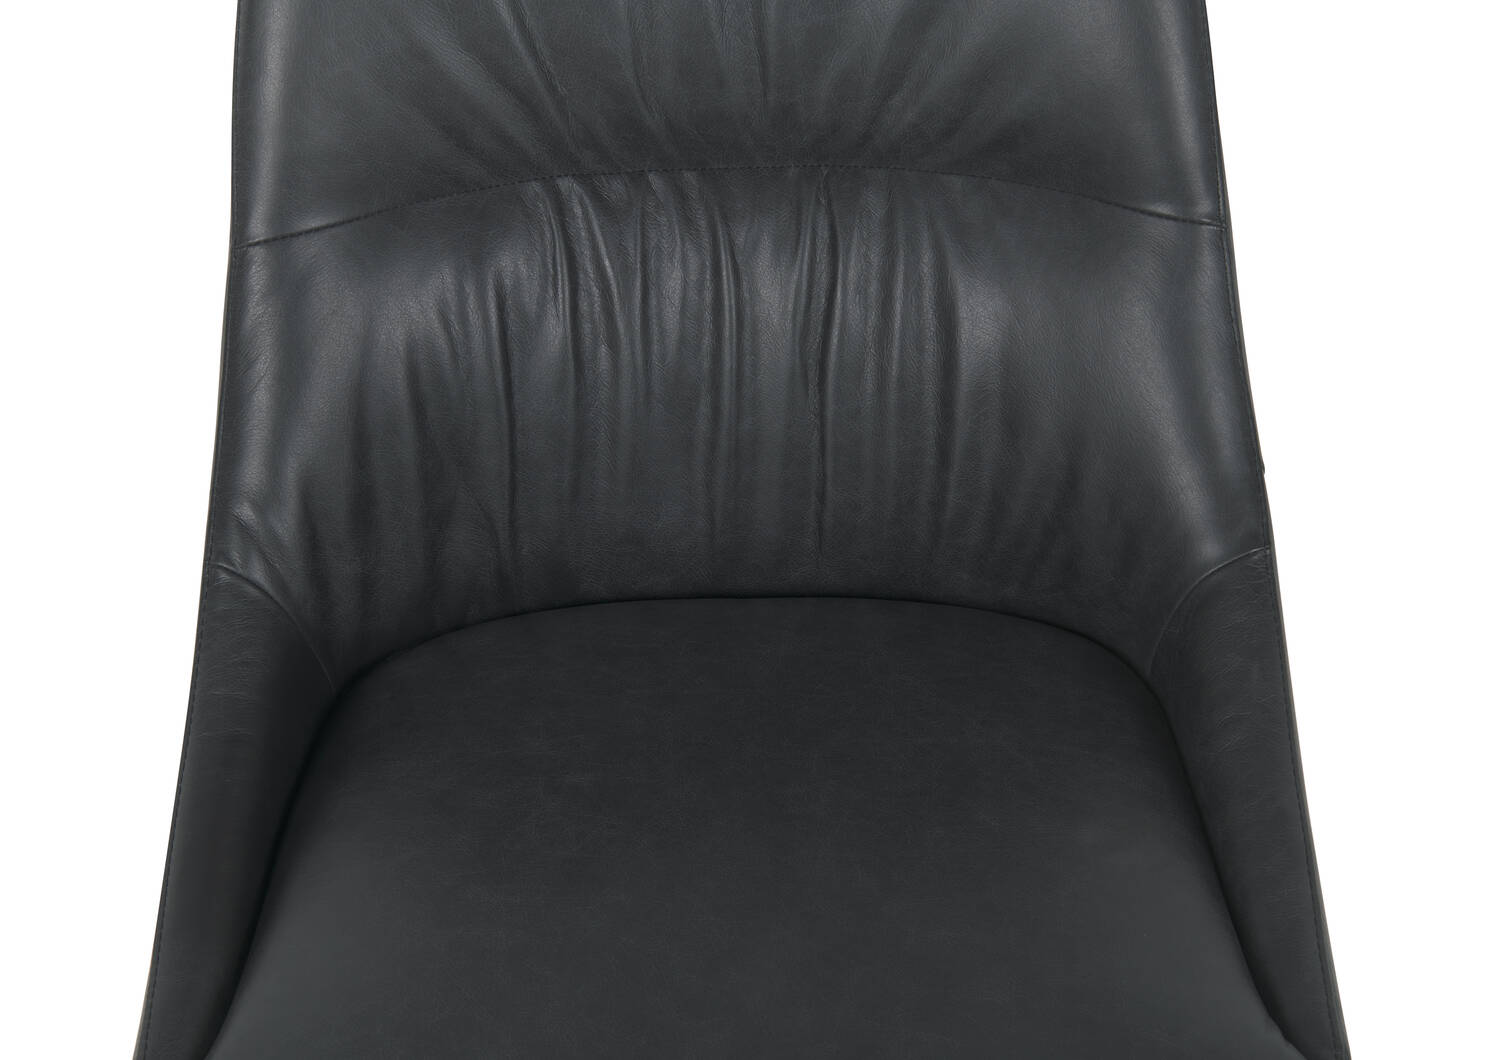 Tyse Leather Dining Chair -Madrid Coal